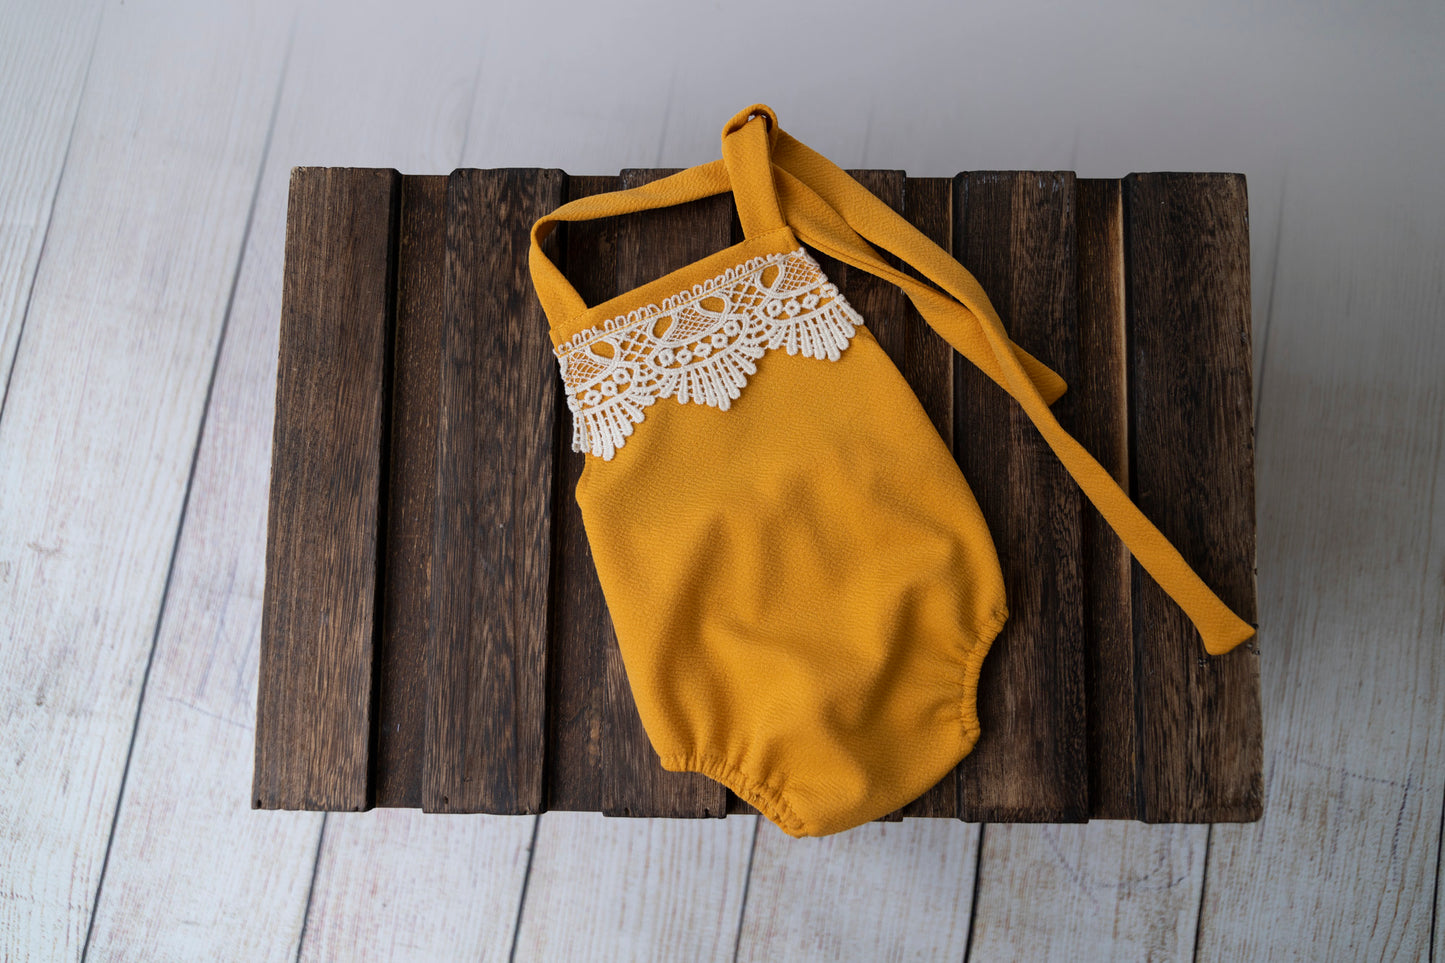 Bohemian Stitch Romper with Lace - Textured - Mustard